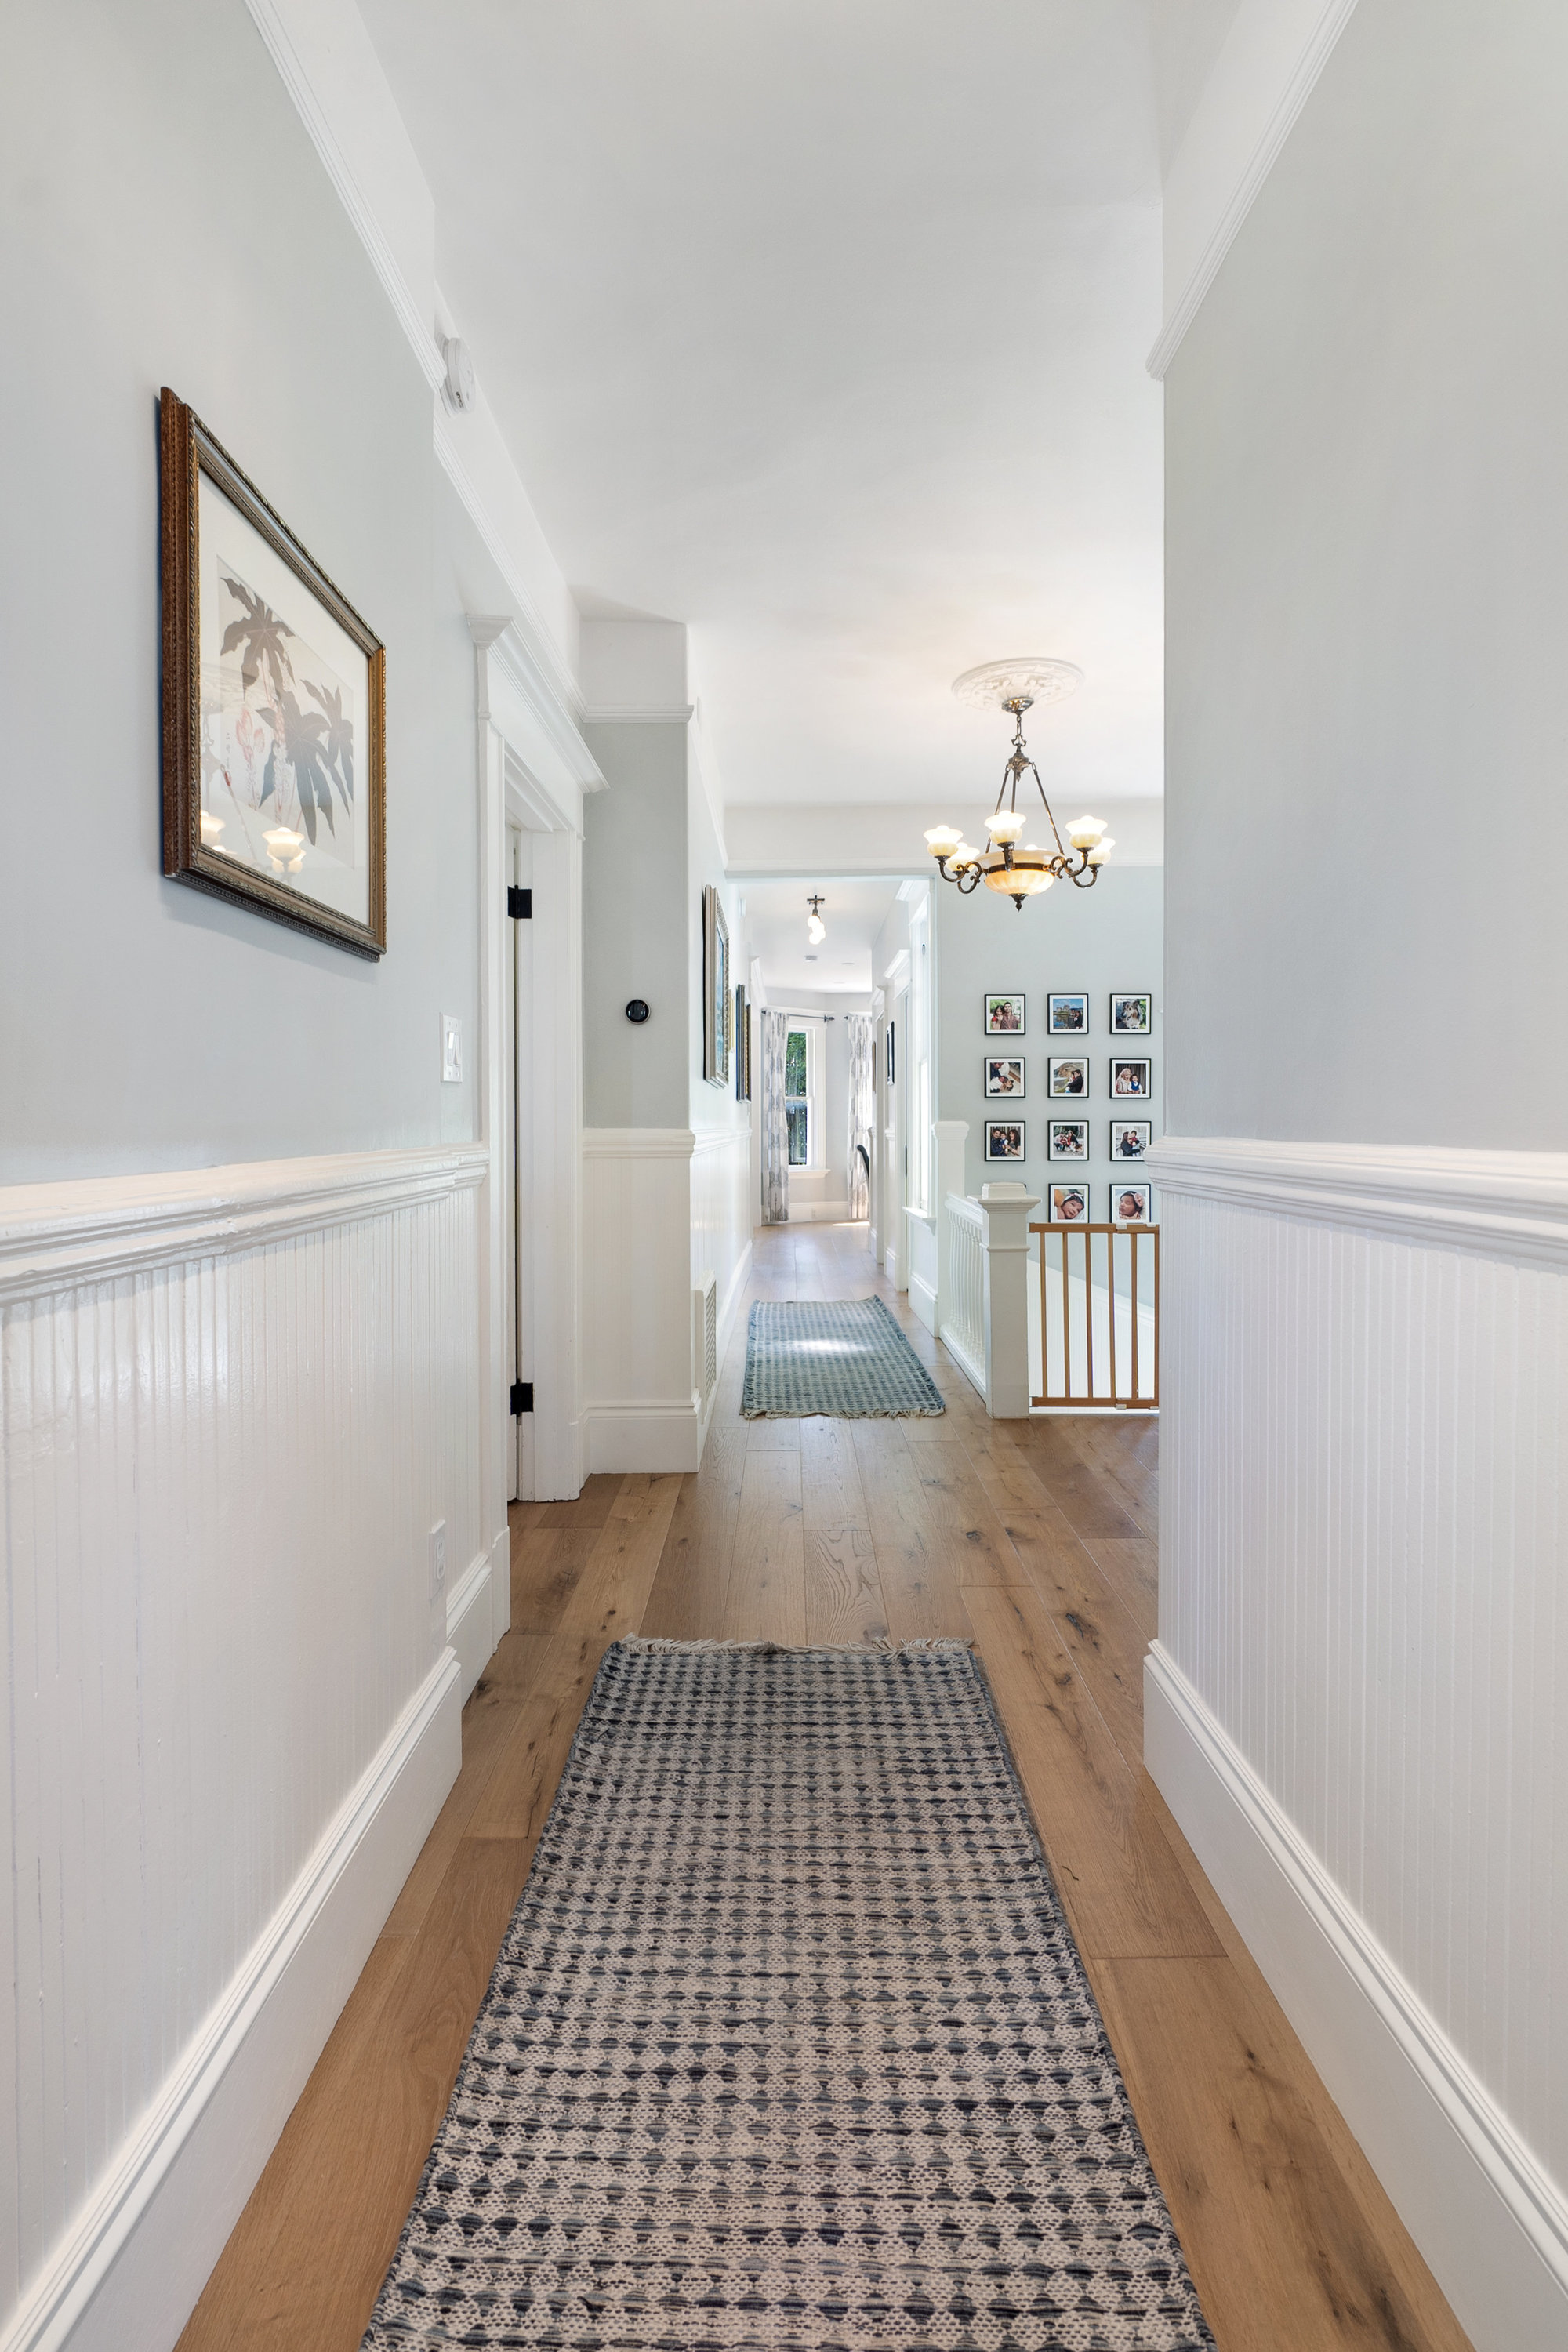 Property Photo: Hallway bathed in natural light